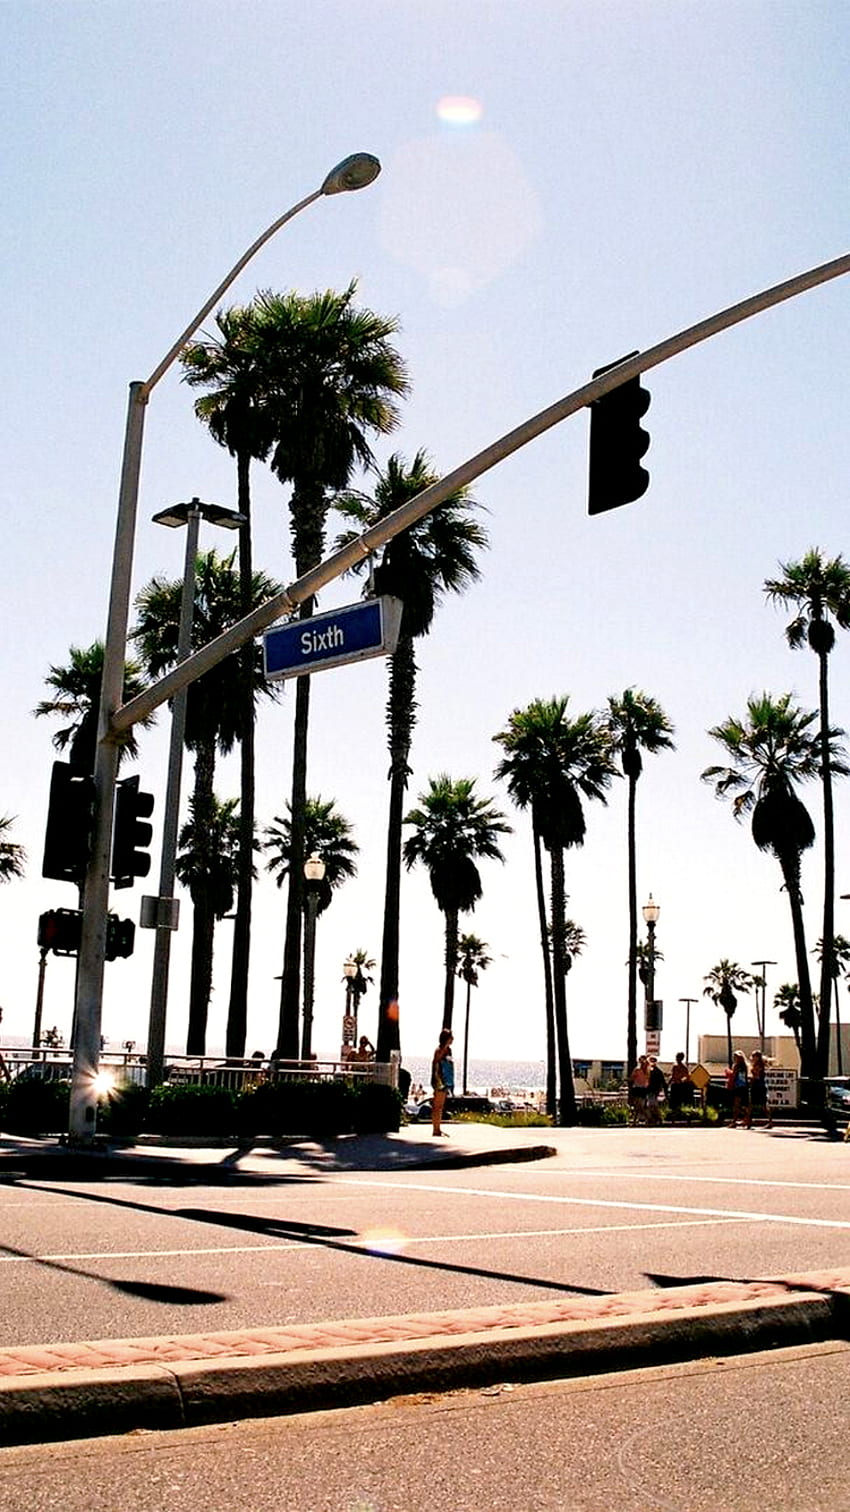 Let's cool off at Surf City! Crossing at Sixth, Pacific Coast Highway HD phone wallpaper